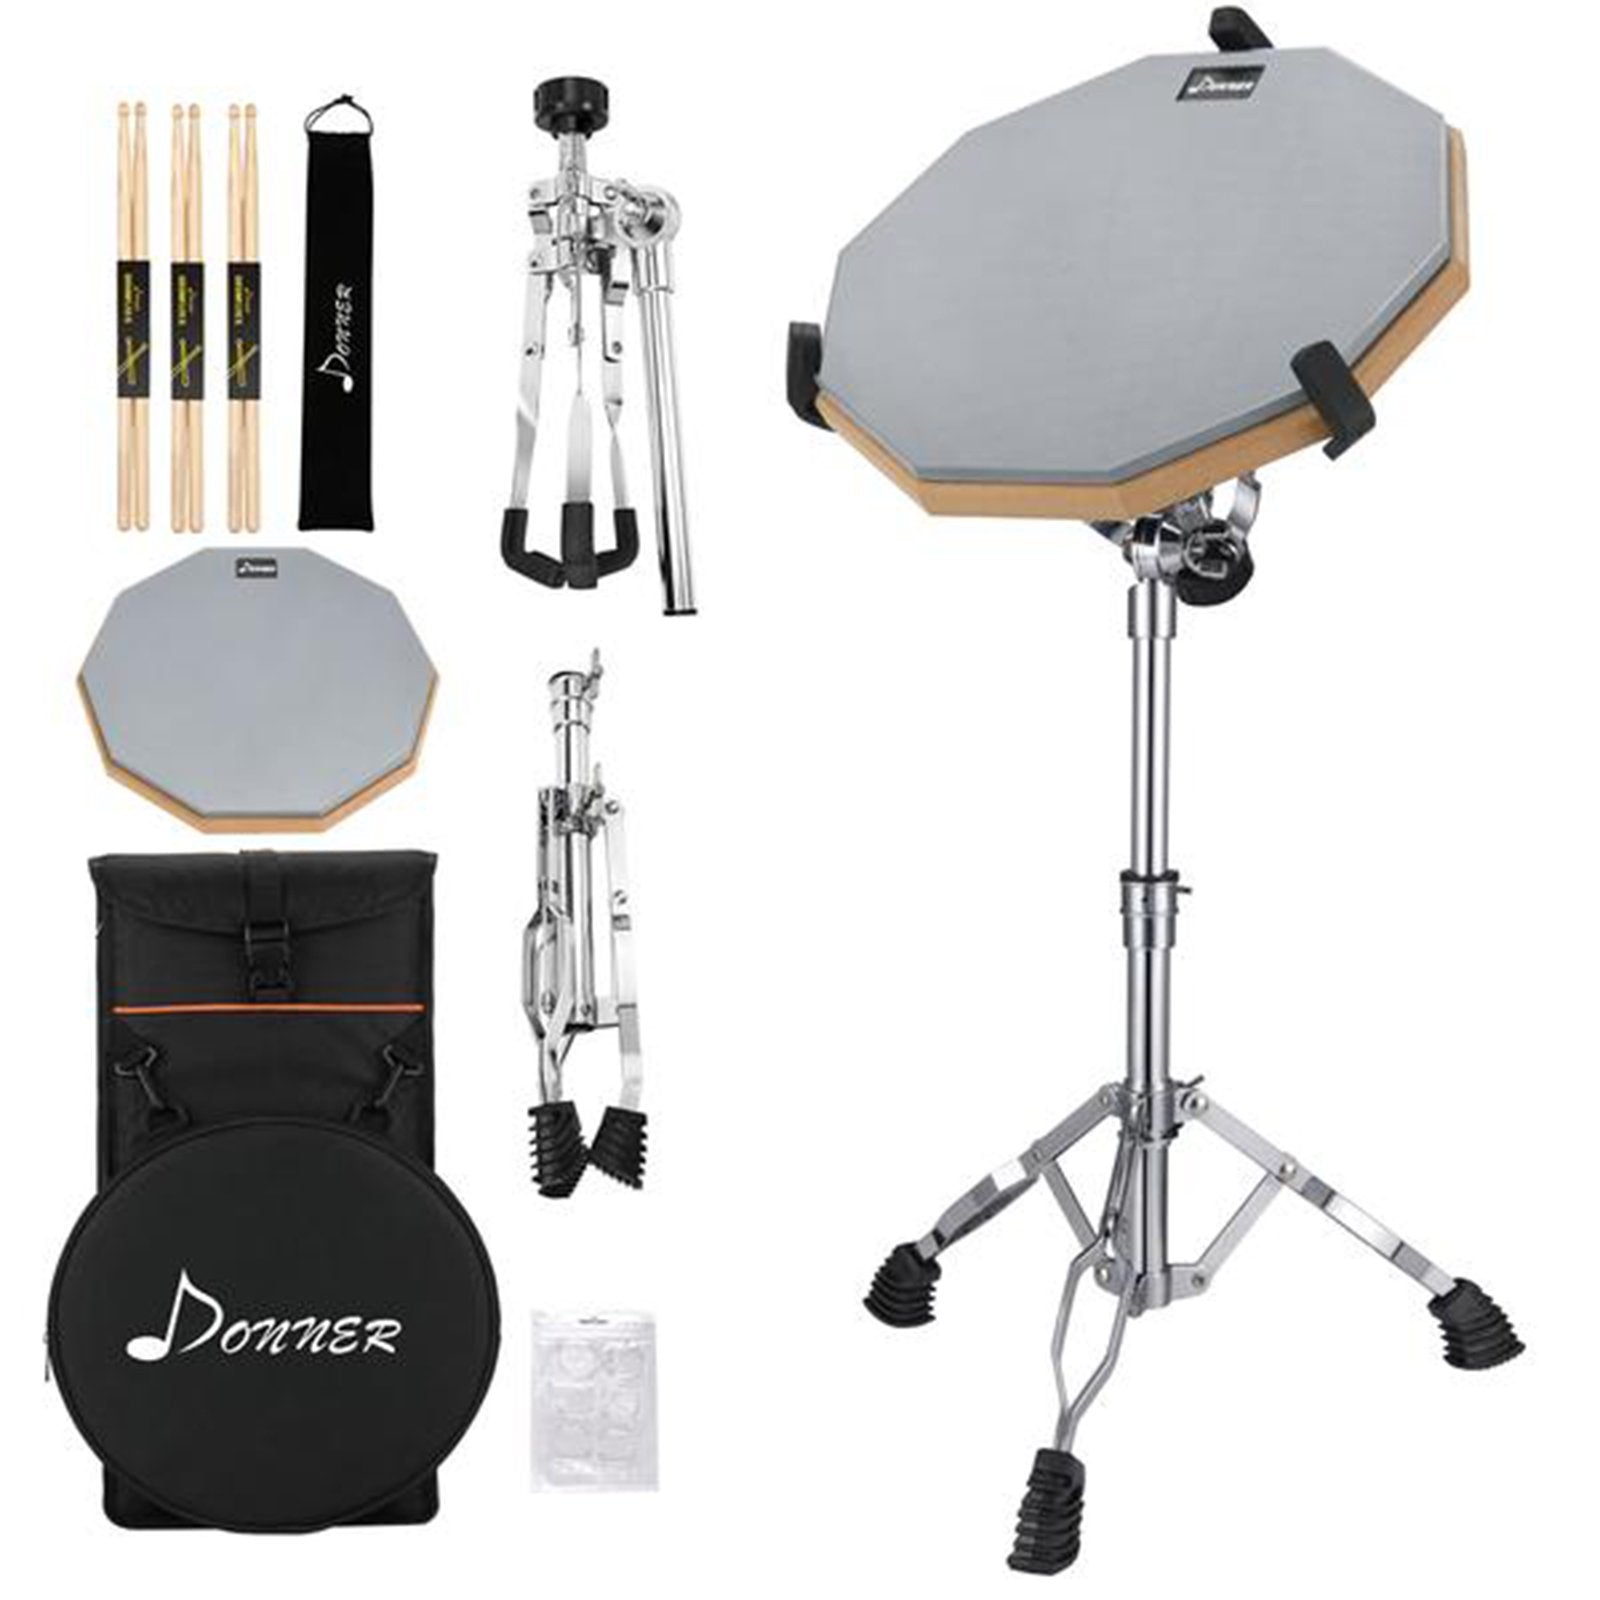 

Donner Drum Practice Pad Set with Drum Stand, Drum Sticks, and Bag